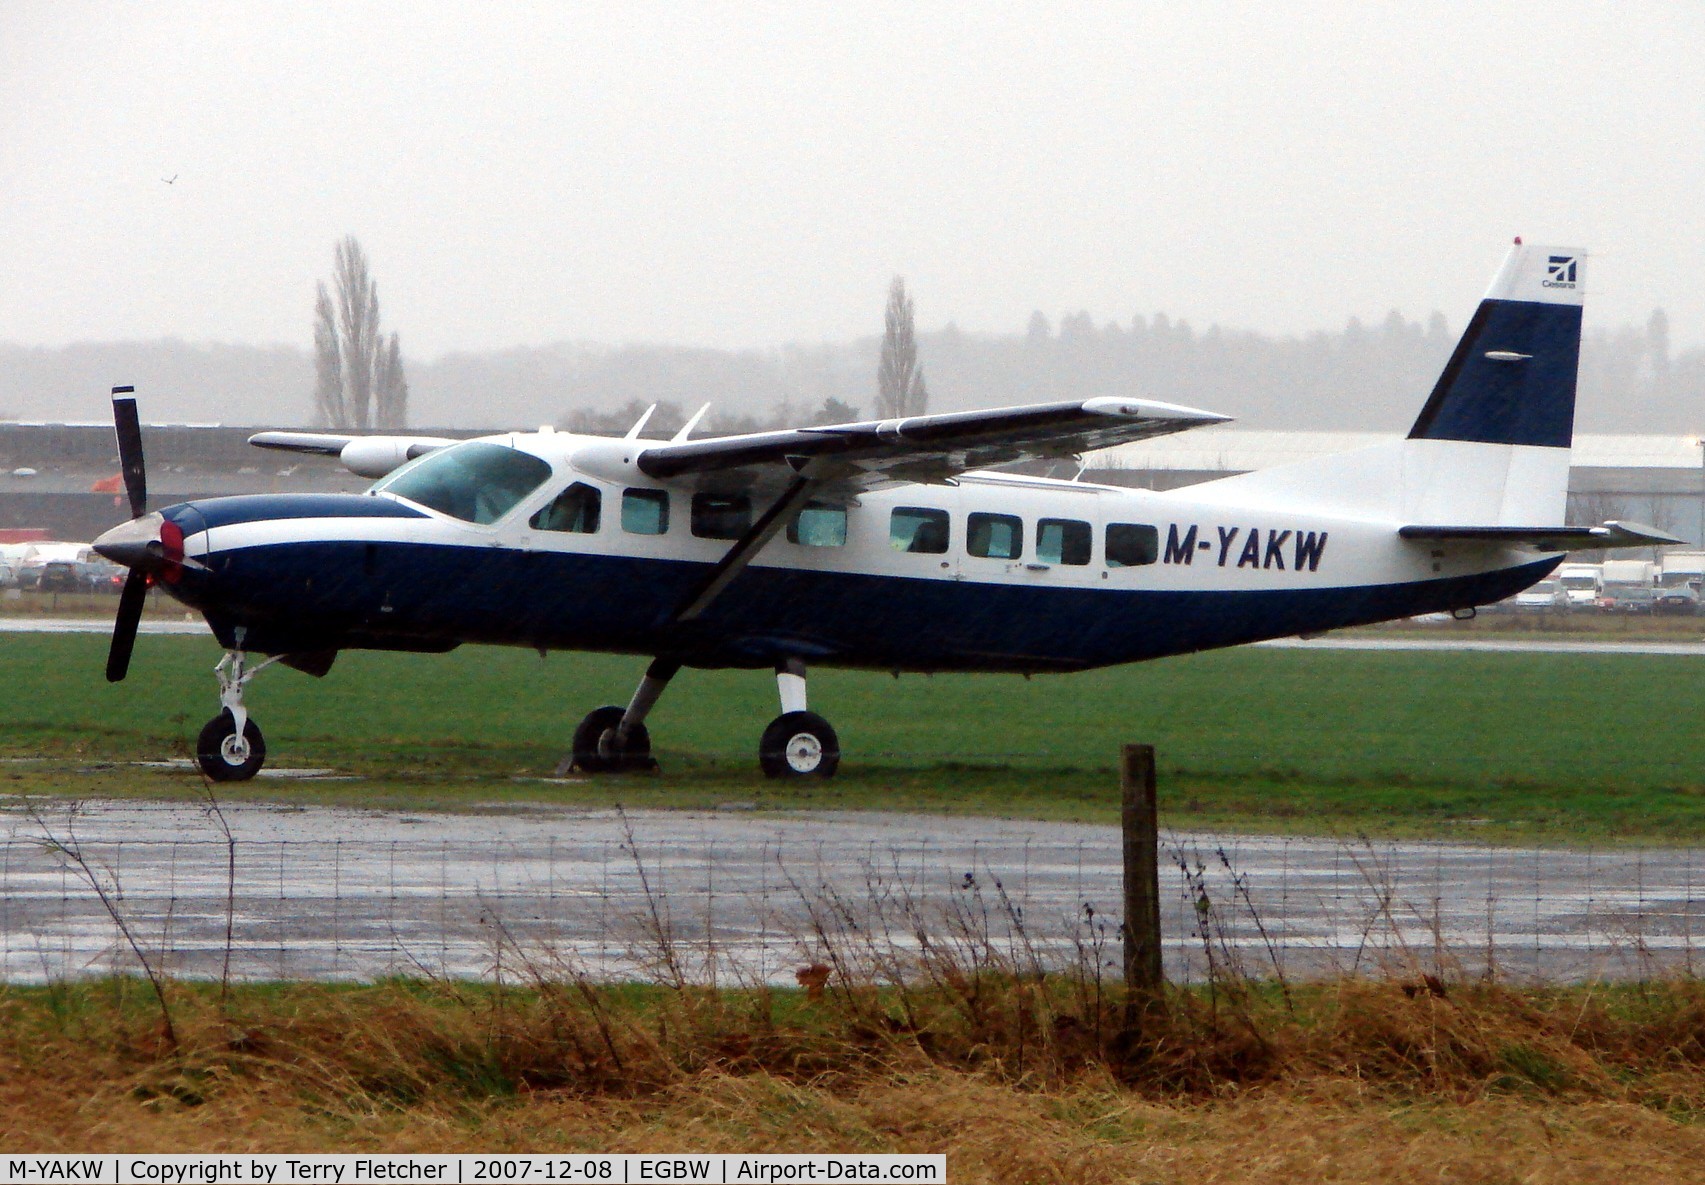 M-YAKW, 2004 Cessna 208B Grand Caravan C/N 208B-1059, a recent addition to the New Isle of Man Aircraft Register